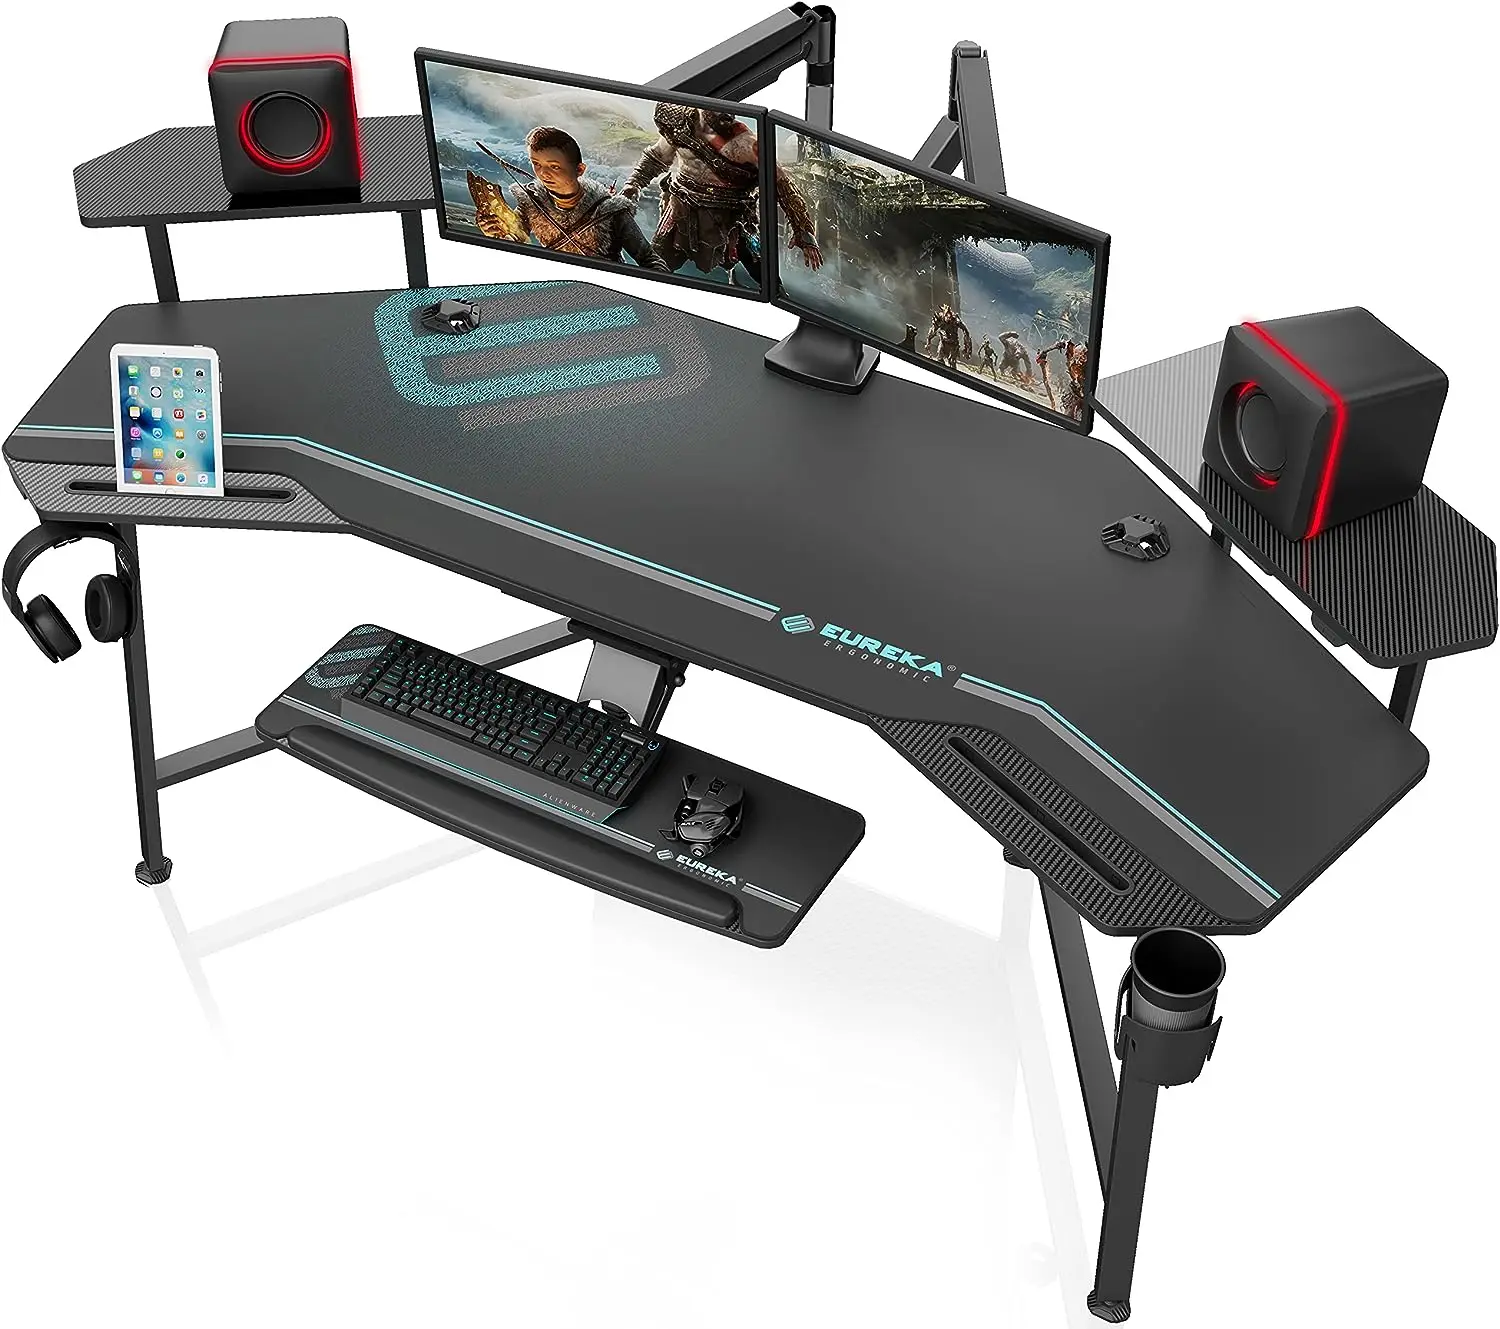 

Desk with Led Lights, 72" Large Wing-Shaped Studio Desk W Keyboard Tray Monitor Stand Dual Headphone Hanger Cup Holder for L